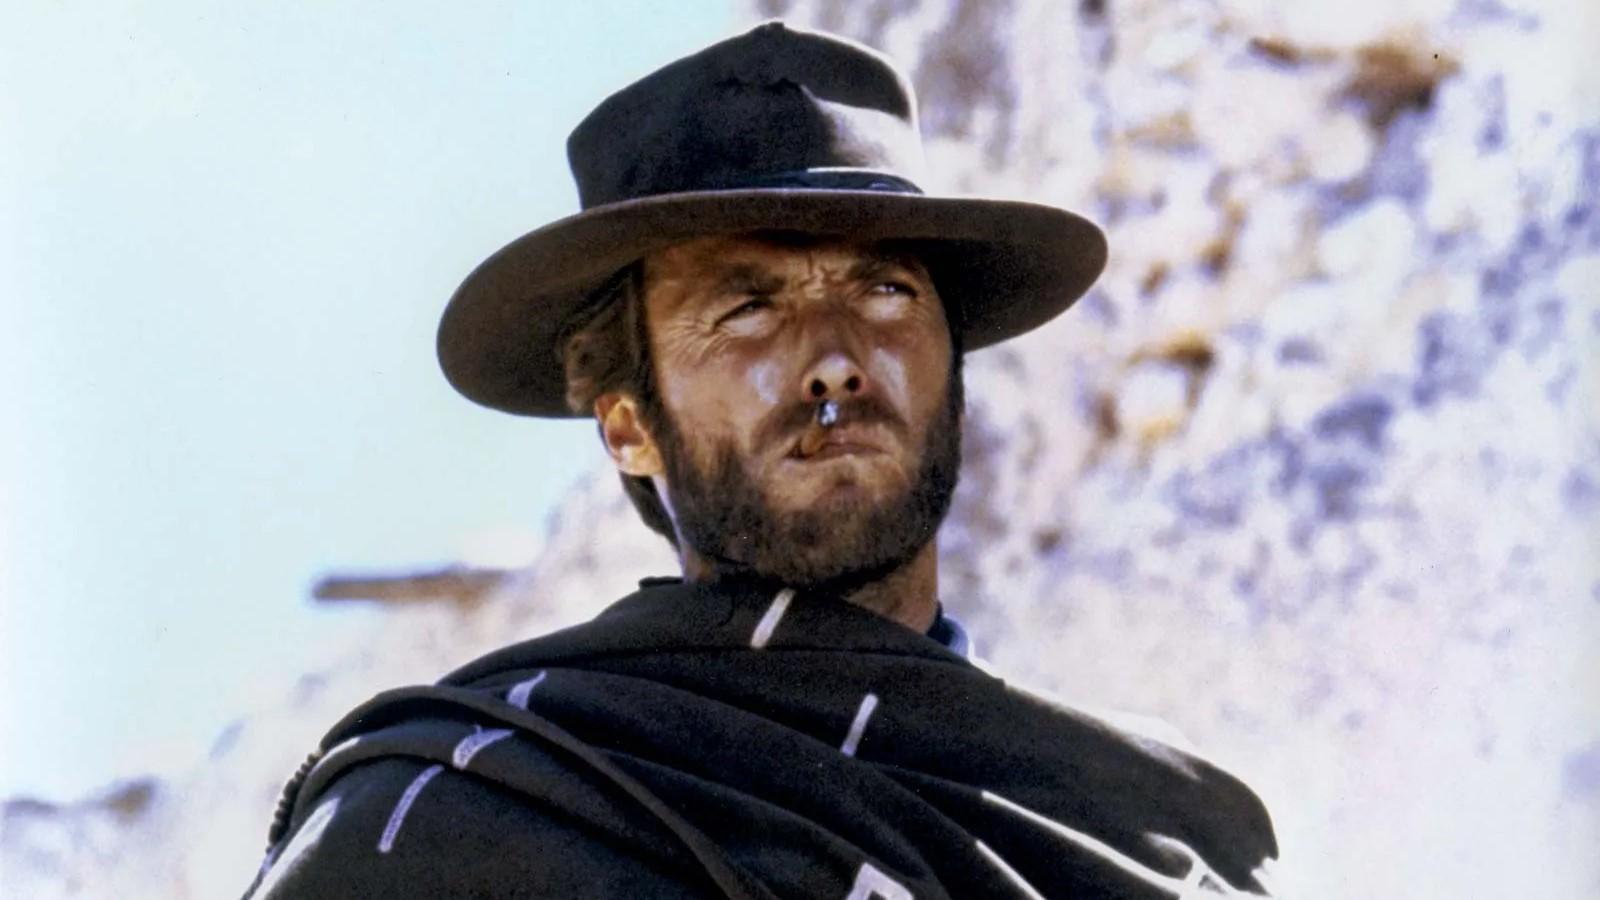 Clint Eastwood as the Man with No Name in A Fistful of Dollars